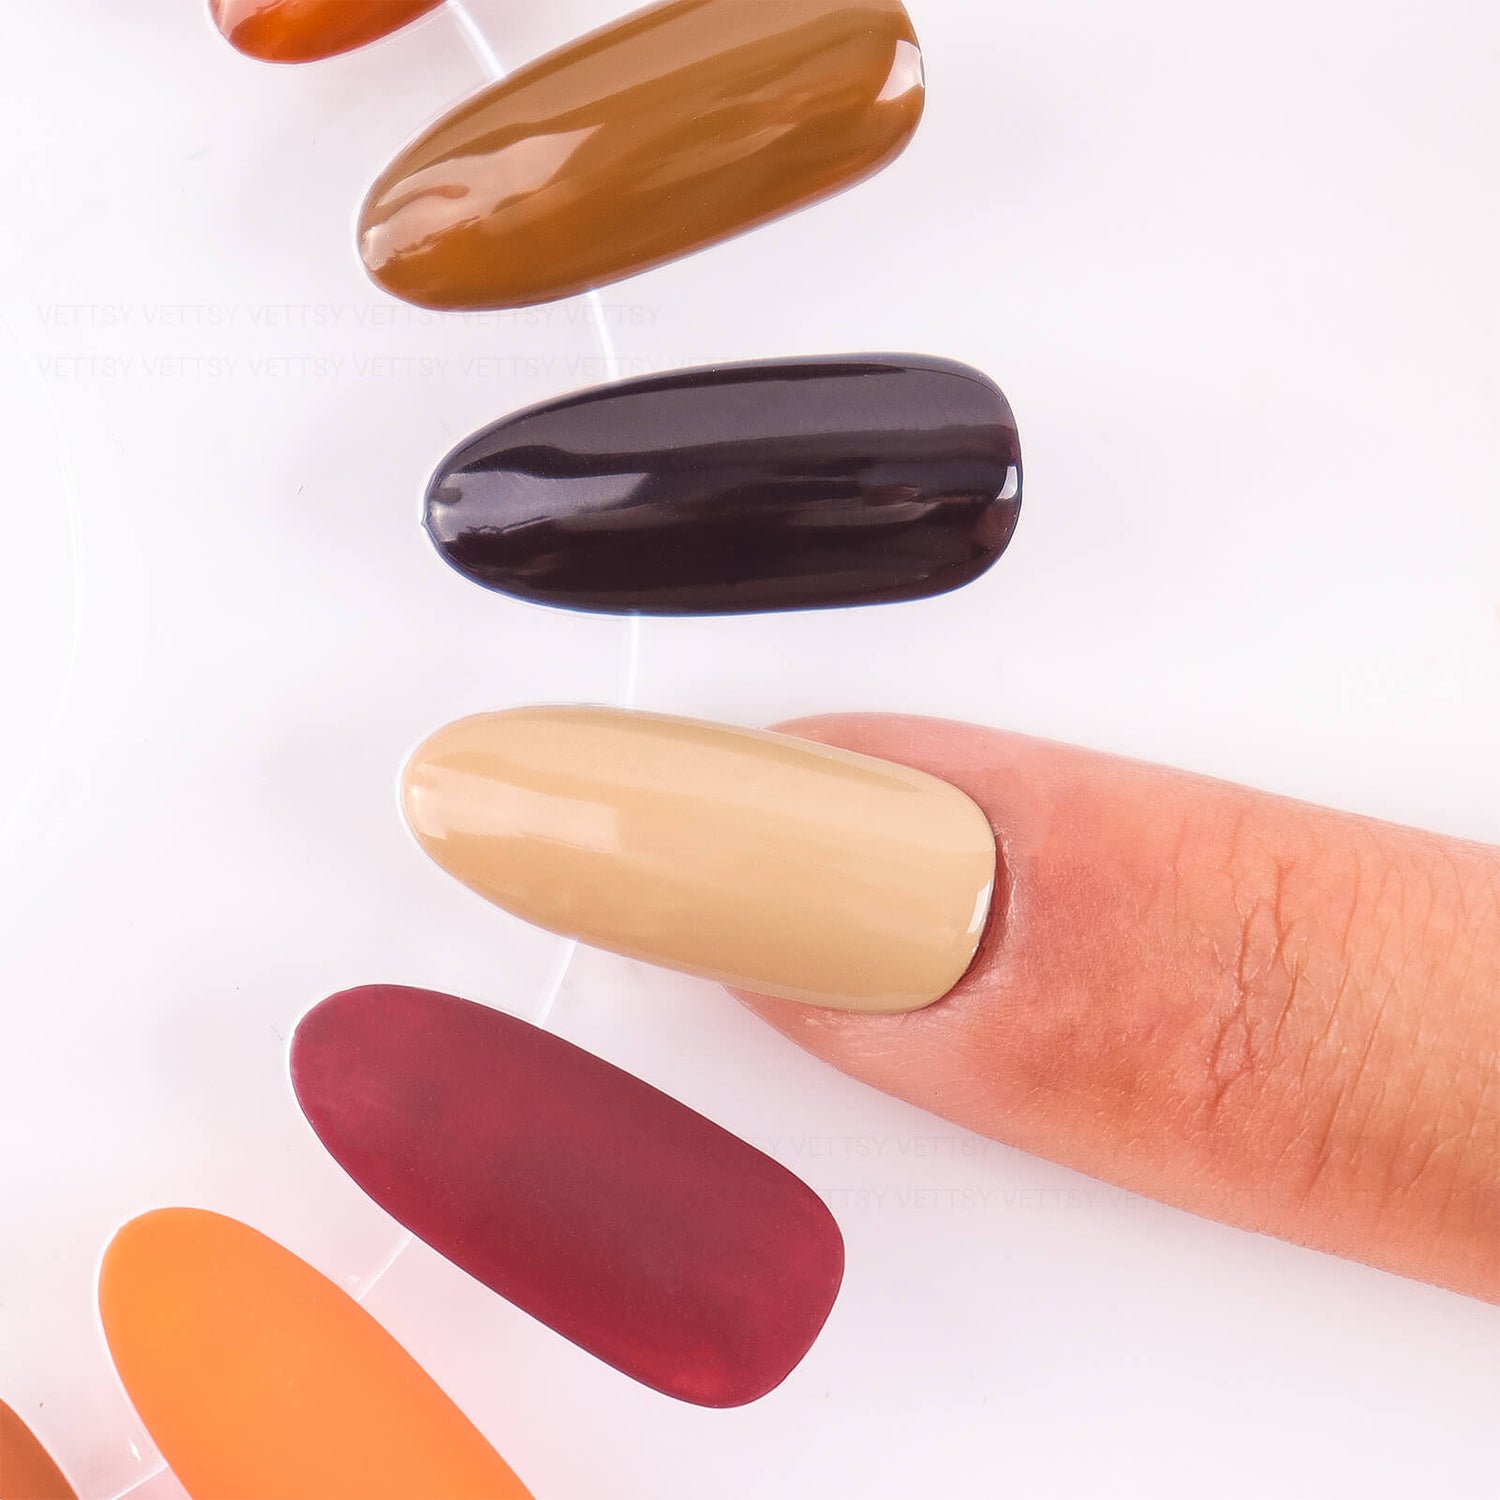 removable-nail-swatches-set-detail